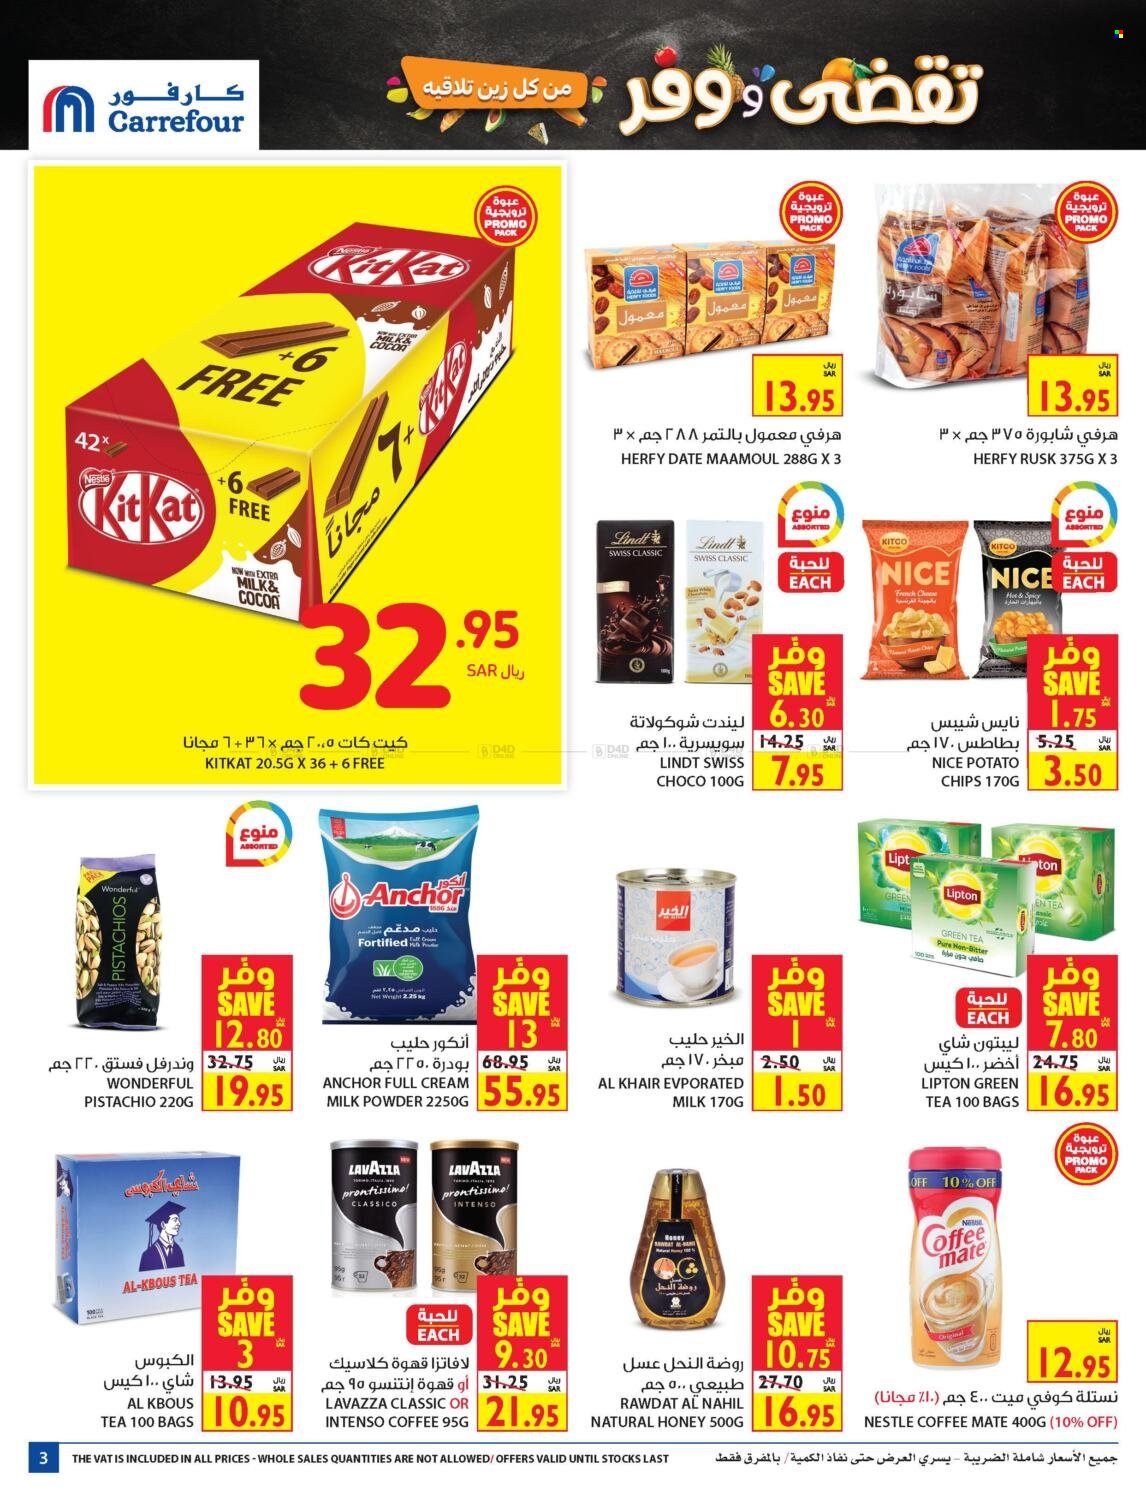 Carrefour flyer  - 11.17.2021 - 11.23.2021. Page 3.